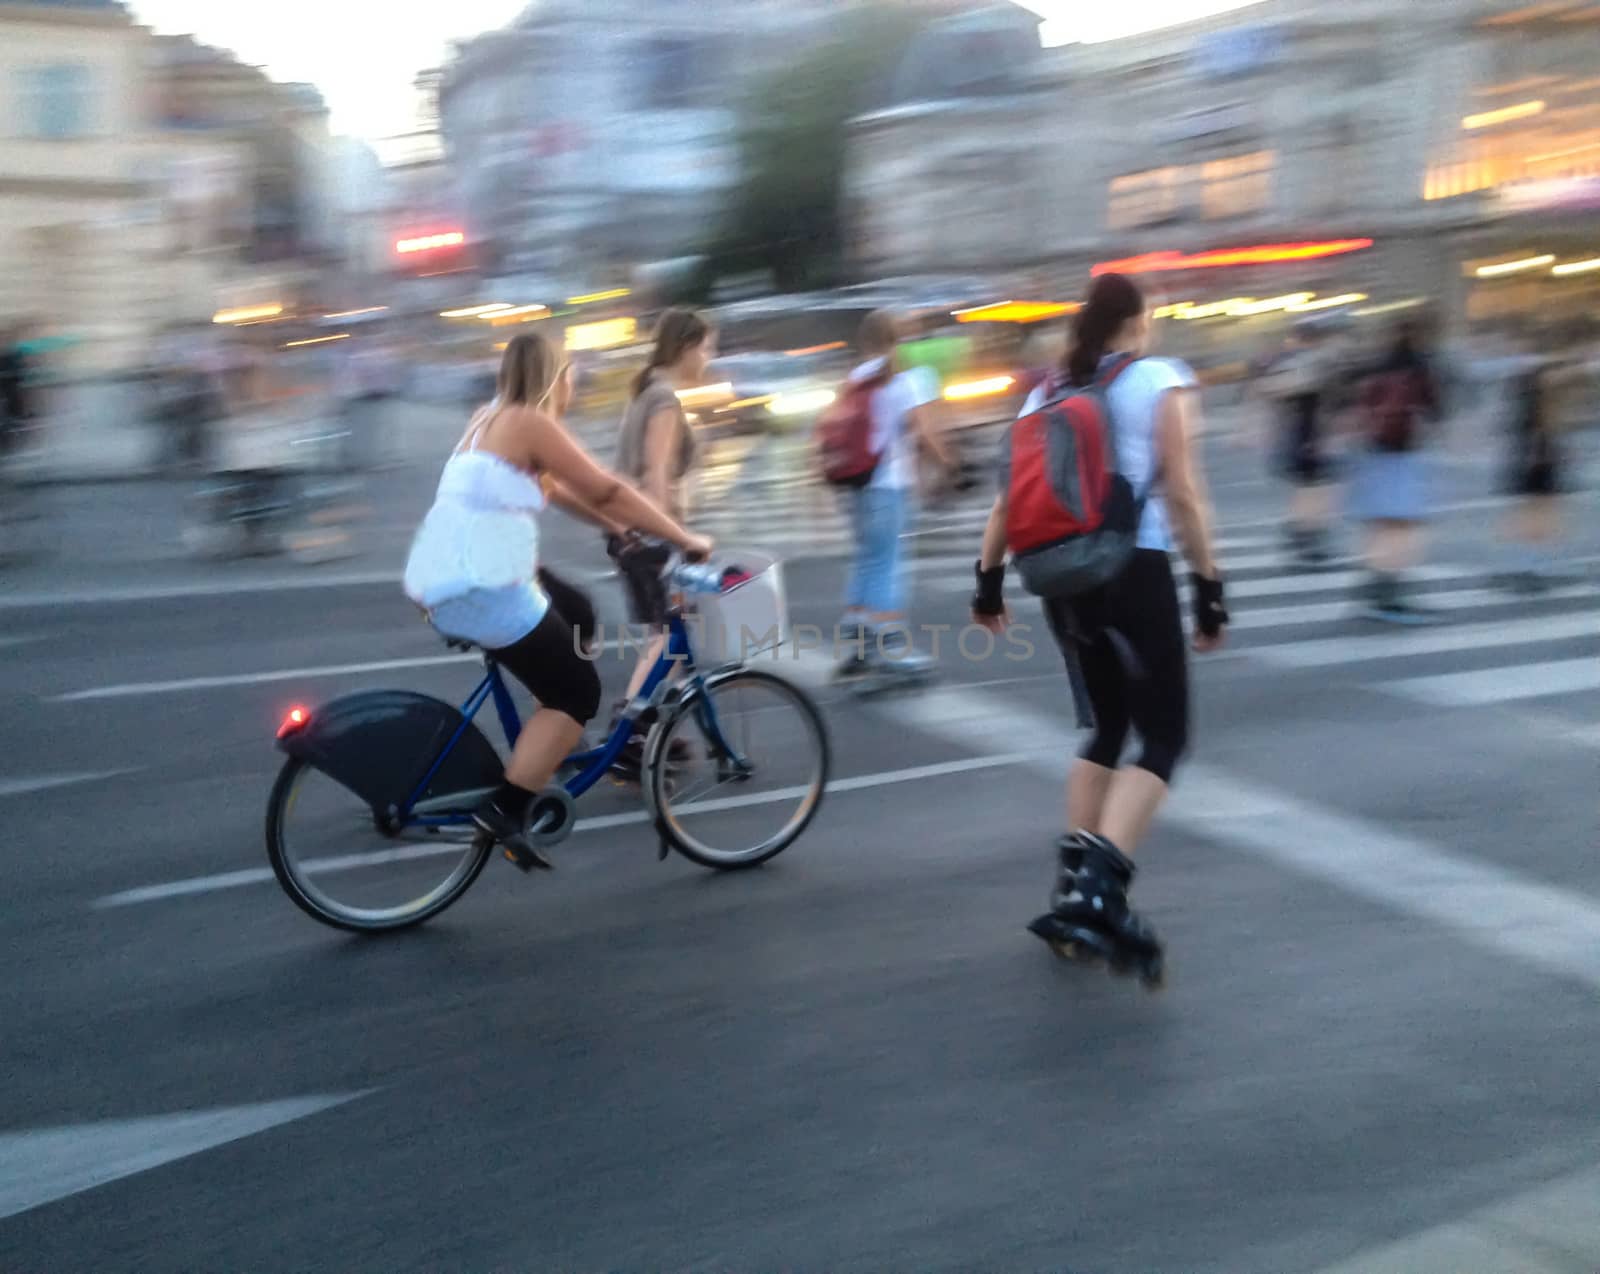 women on the move with bicycle and rollerskates, background blurred motion